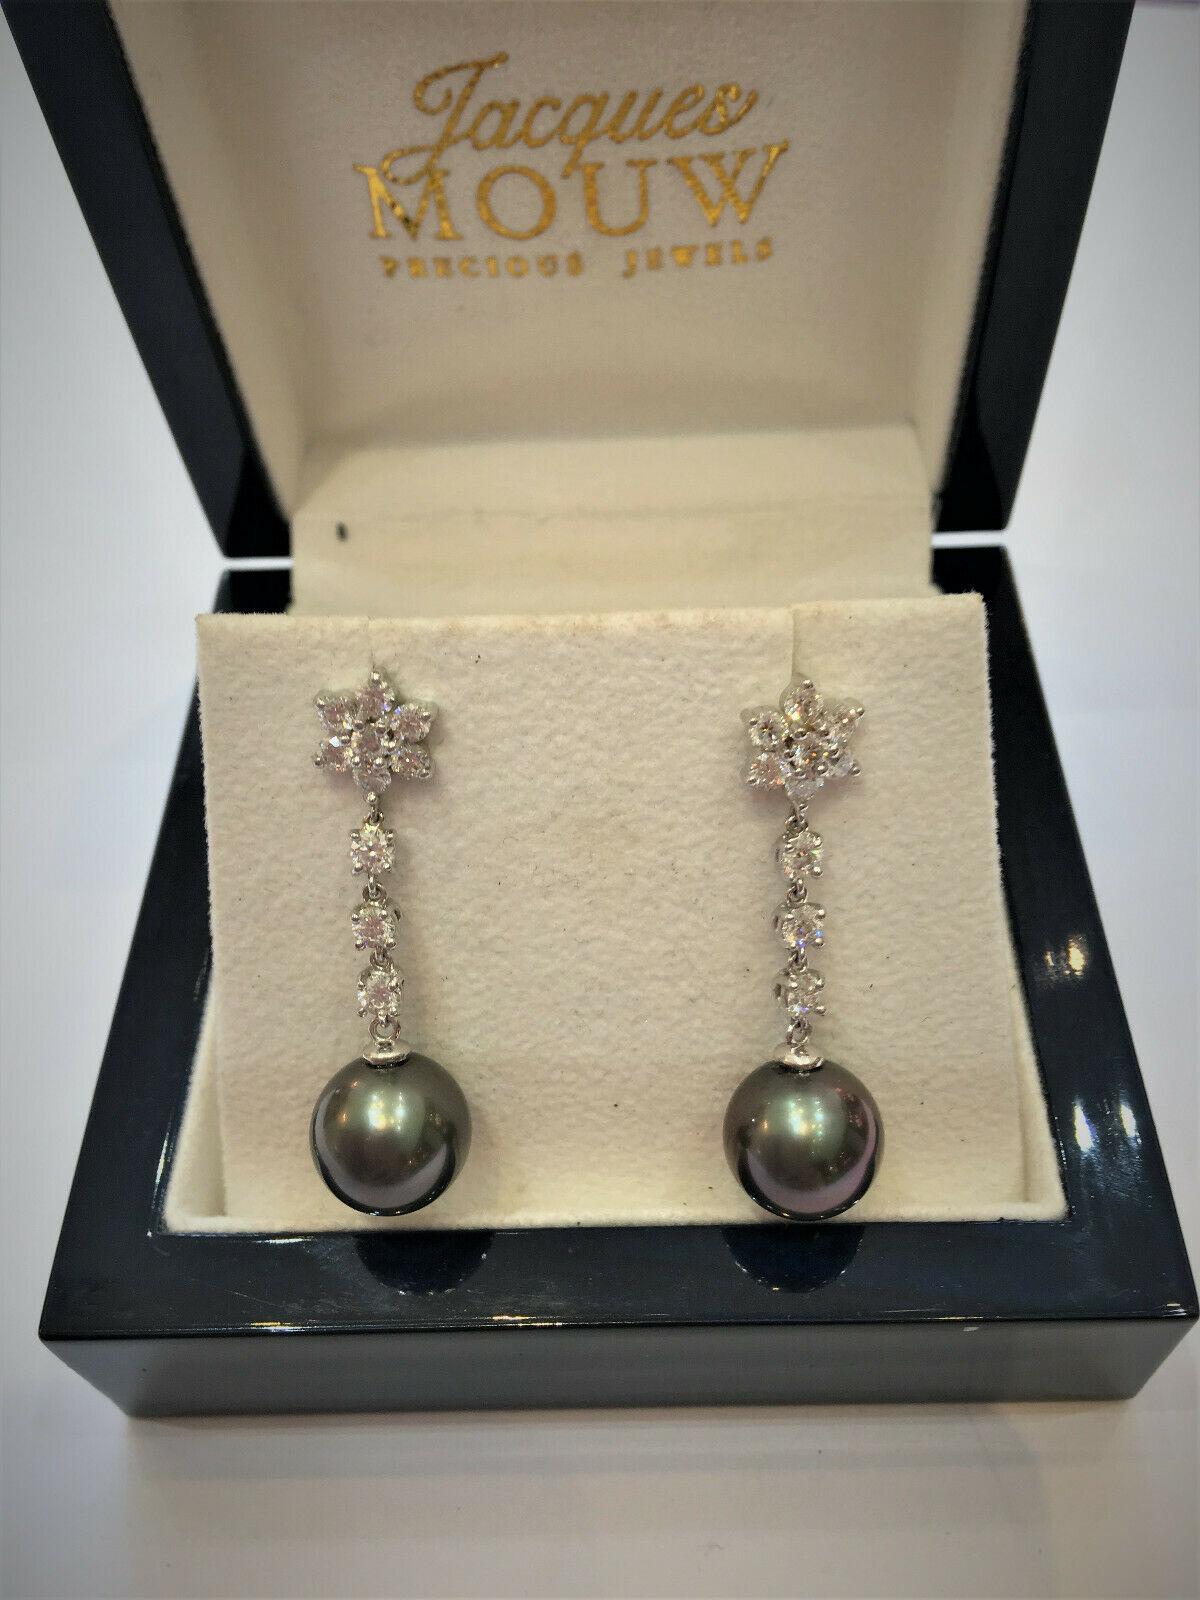 Tahitian Cultured Pearl and Diamond Earrings 11.0mm 14 White Gold

Black Tahitian Cultured Pearl measures 11.0 mm

Tota Carat Weight of Diamond 1.61 carats

F Color VS Clarity

Set in 14K White Gold

Shipped in a gift box

ITEM DETAILS

    Item